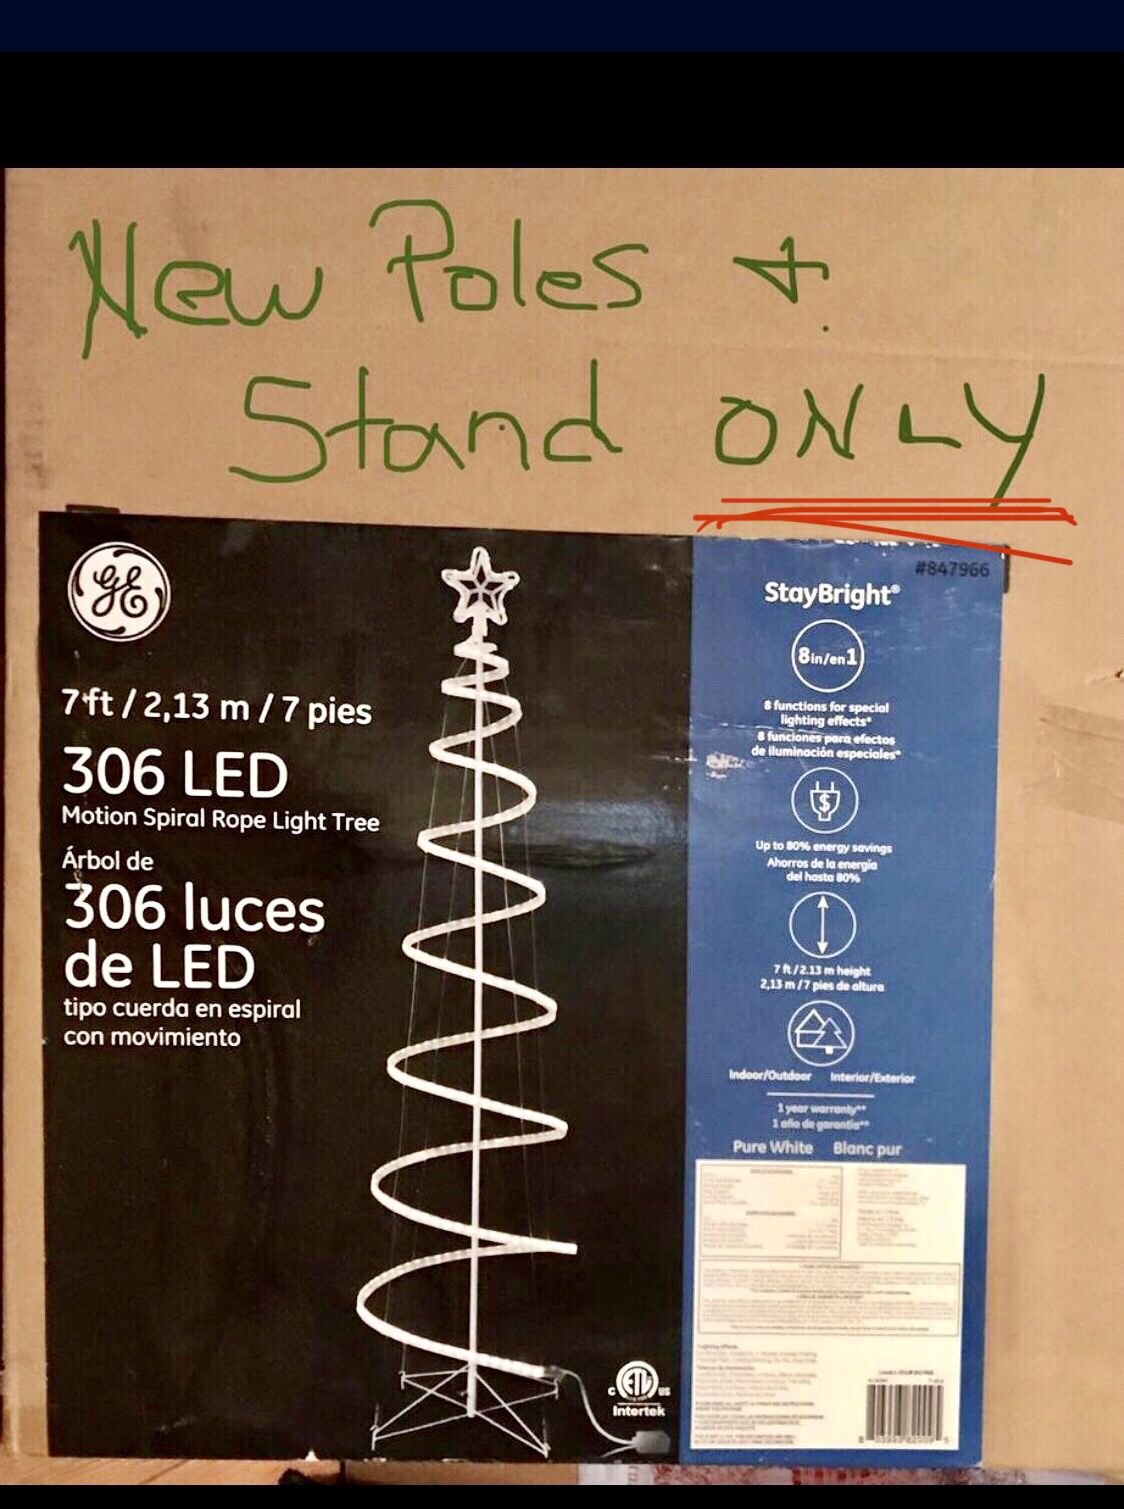 GE Spiral LED Tree REPLACEMENT PARTS - New Metal Poles and Stand